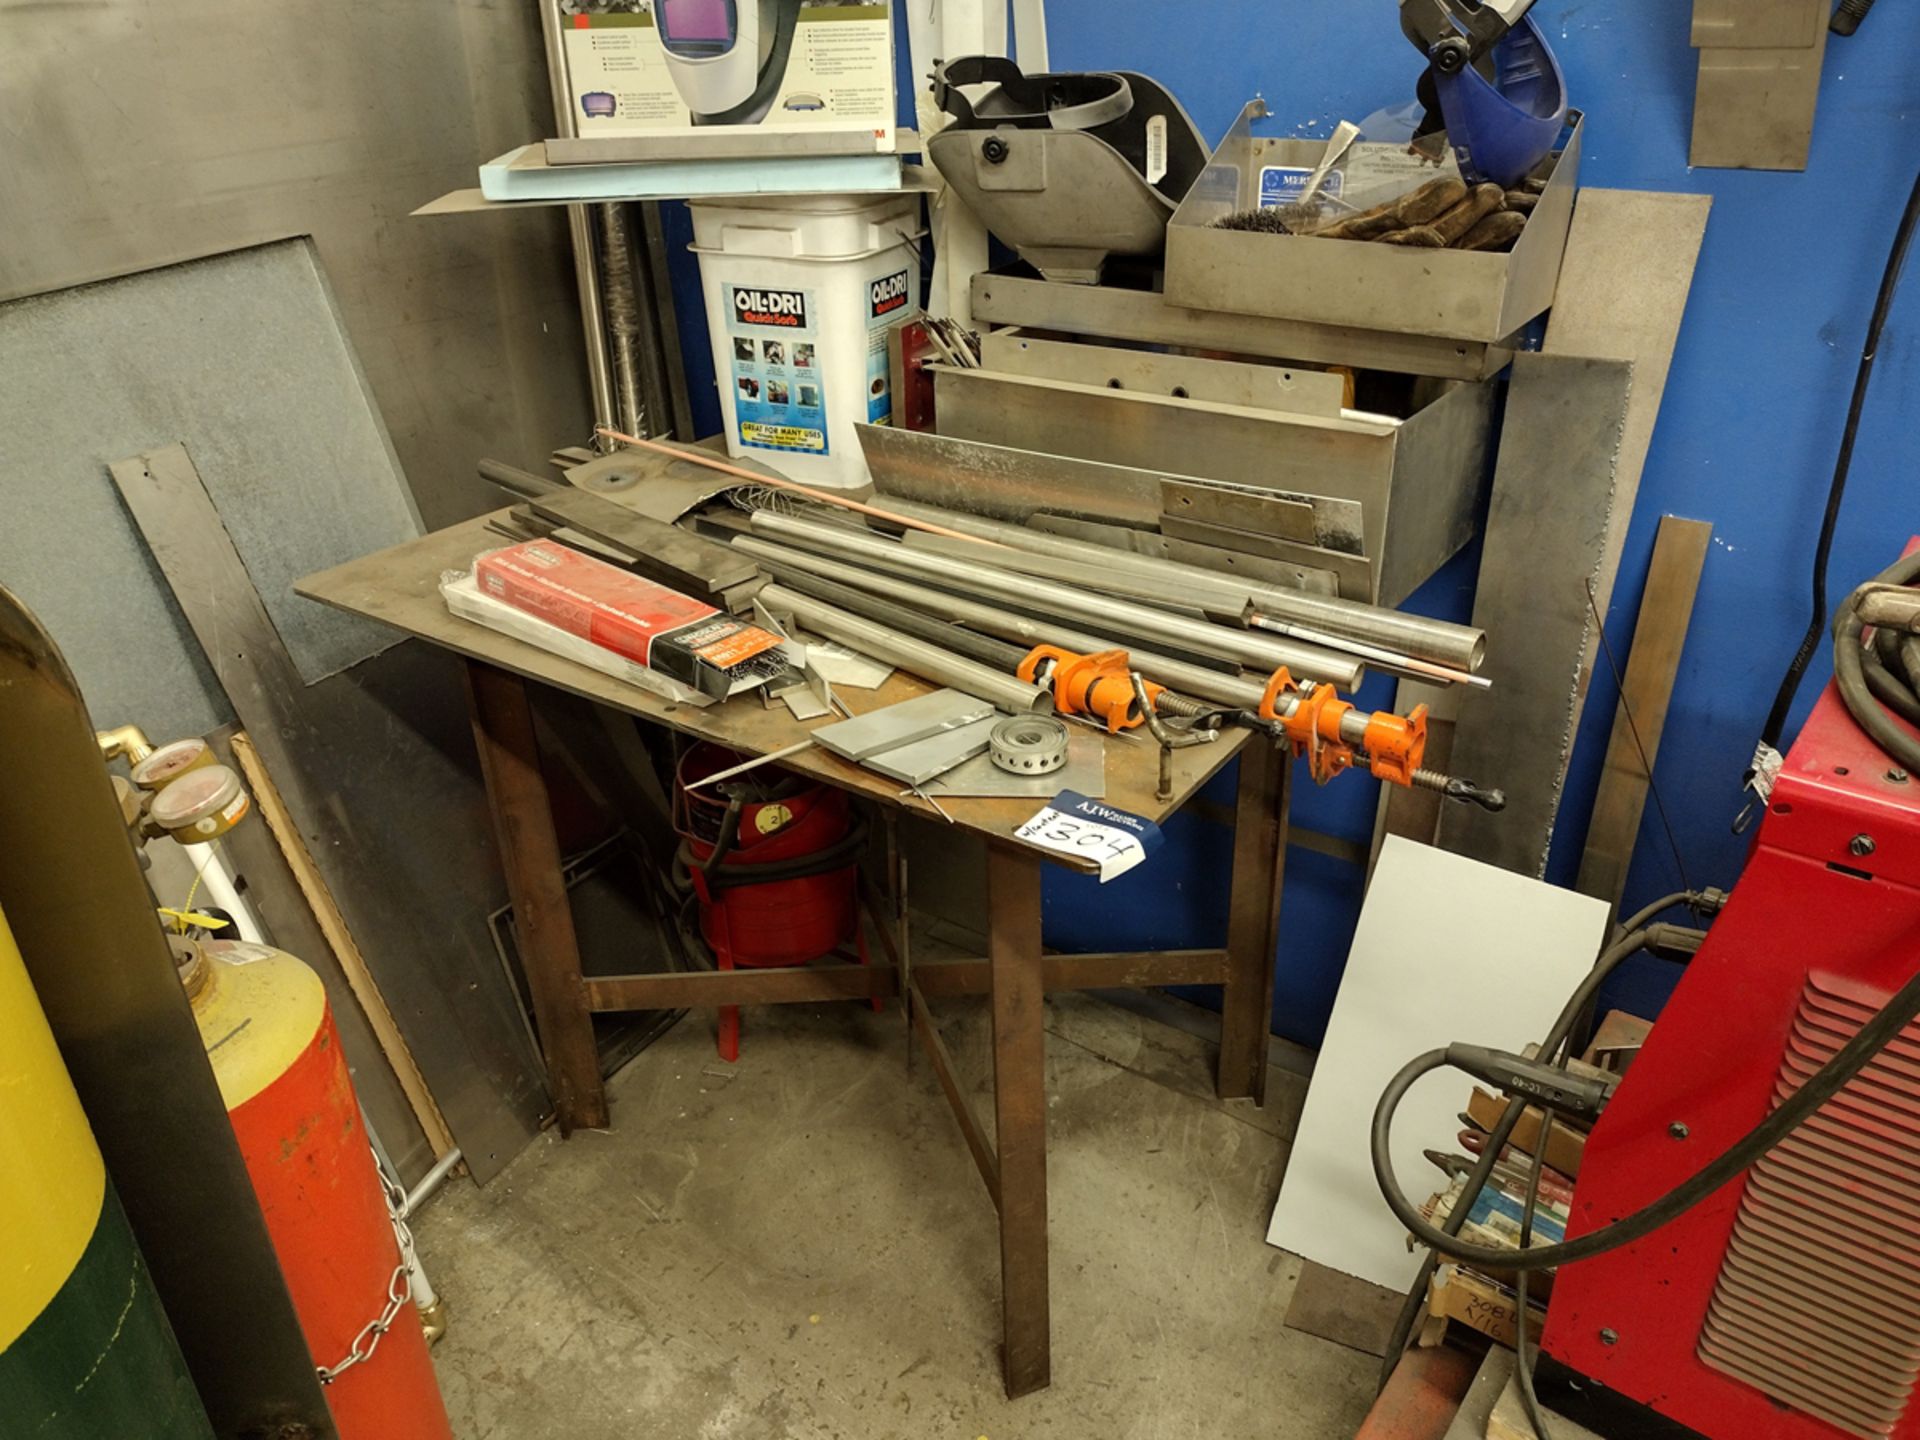 Welding Table with Contents